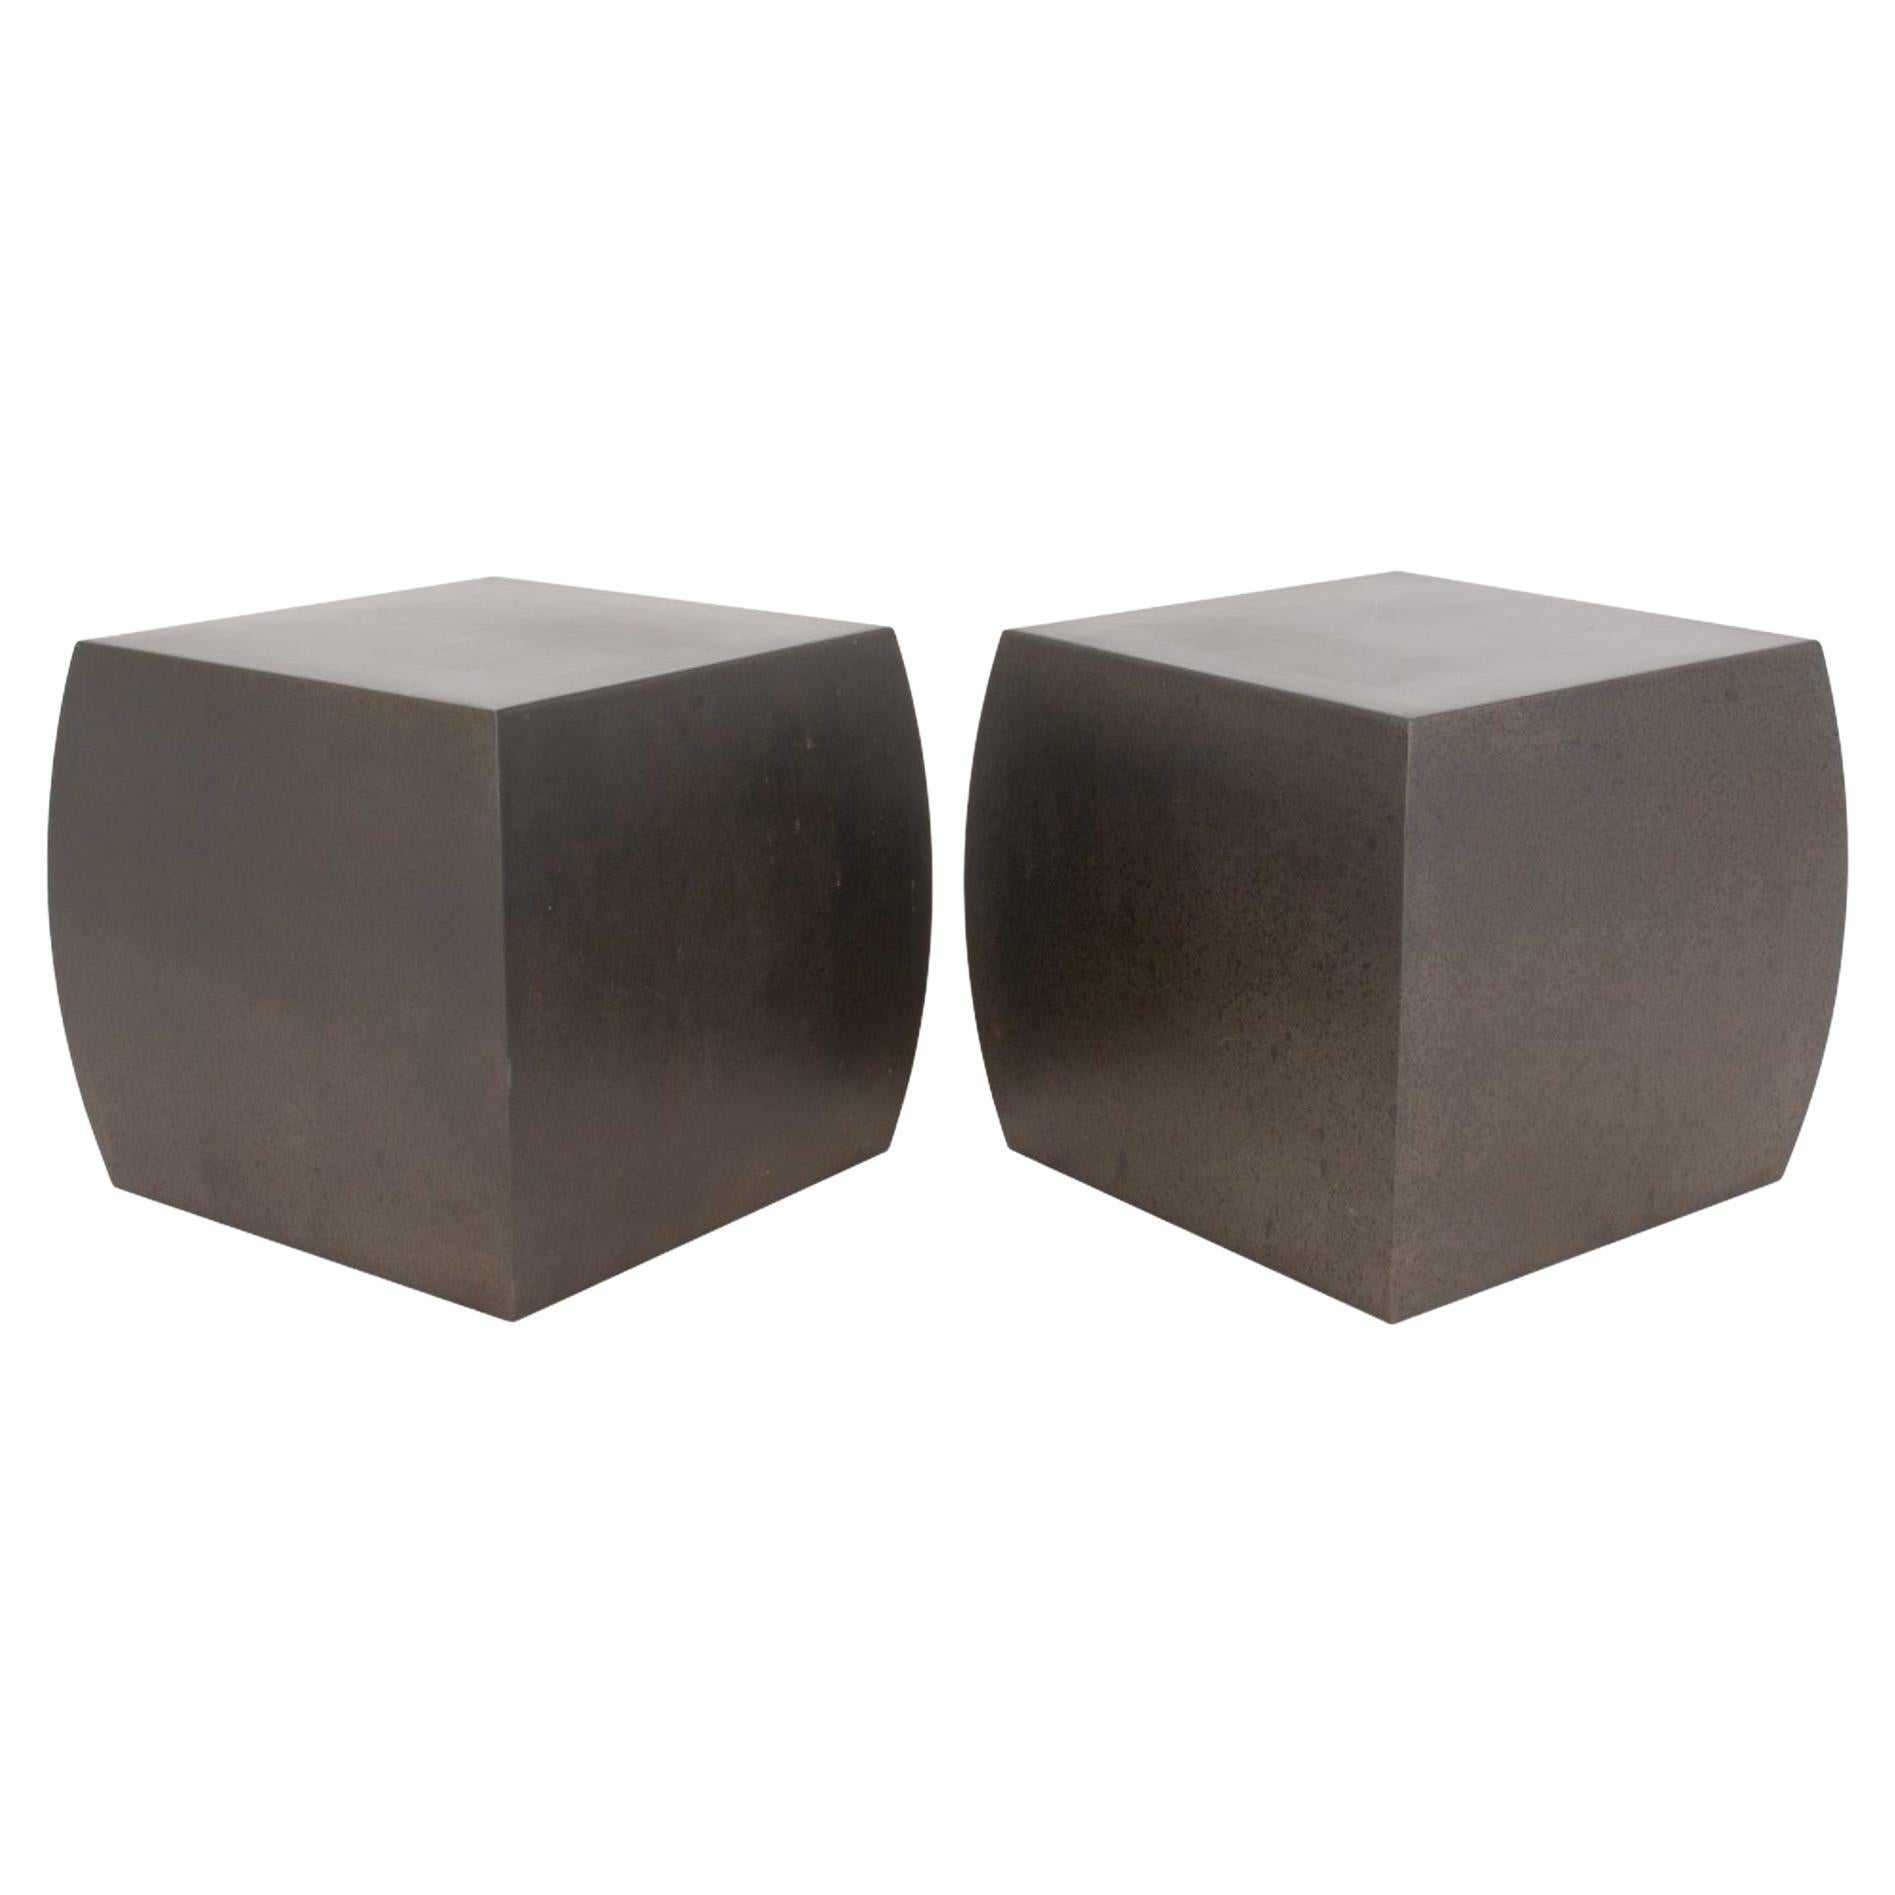 Robert Kuo Manner Metal Square End Table, Pair